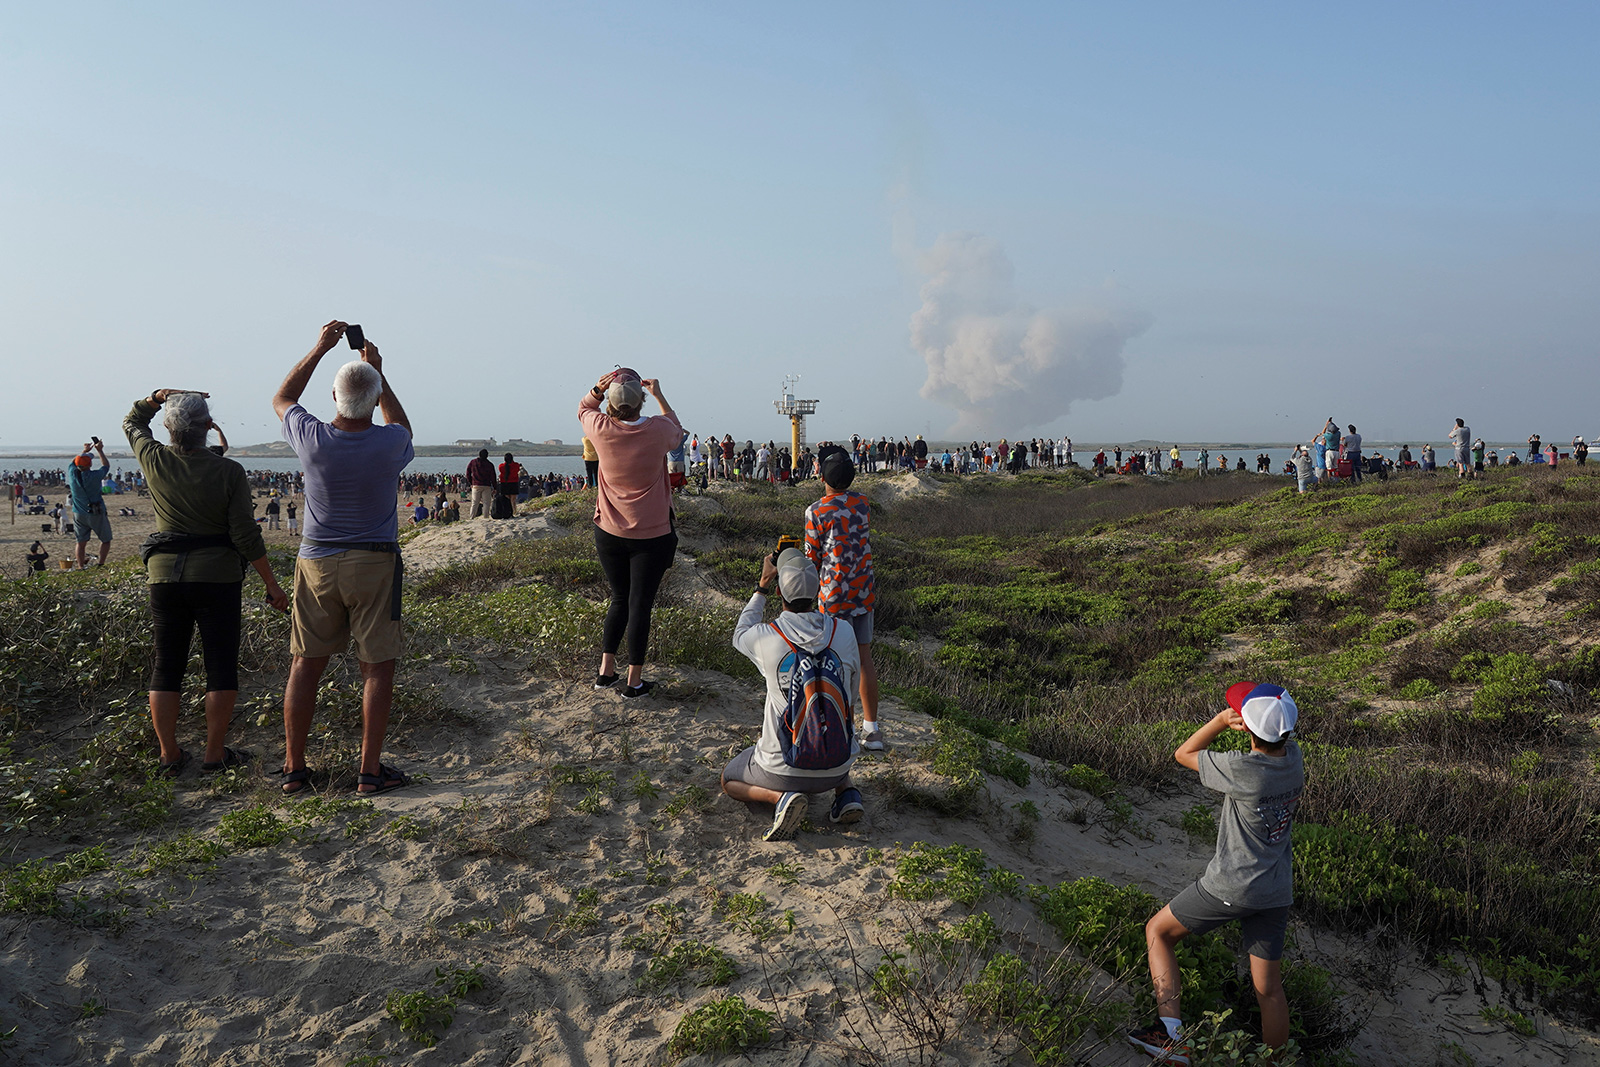 Onlookers watch as SpaceX's Starship take off near Brownsville, Texas, on Thursday, April 20.